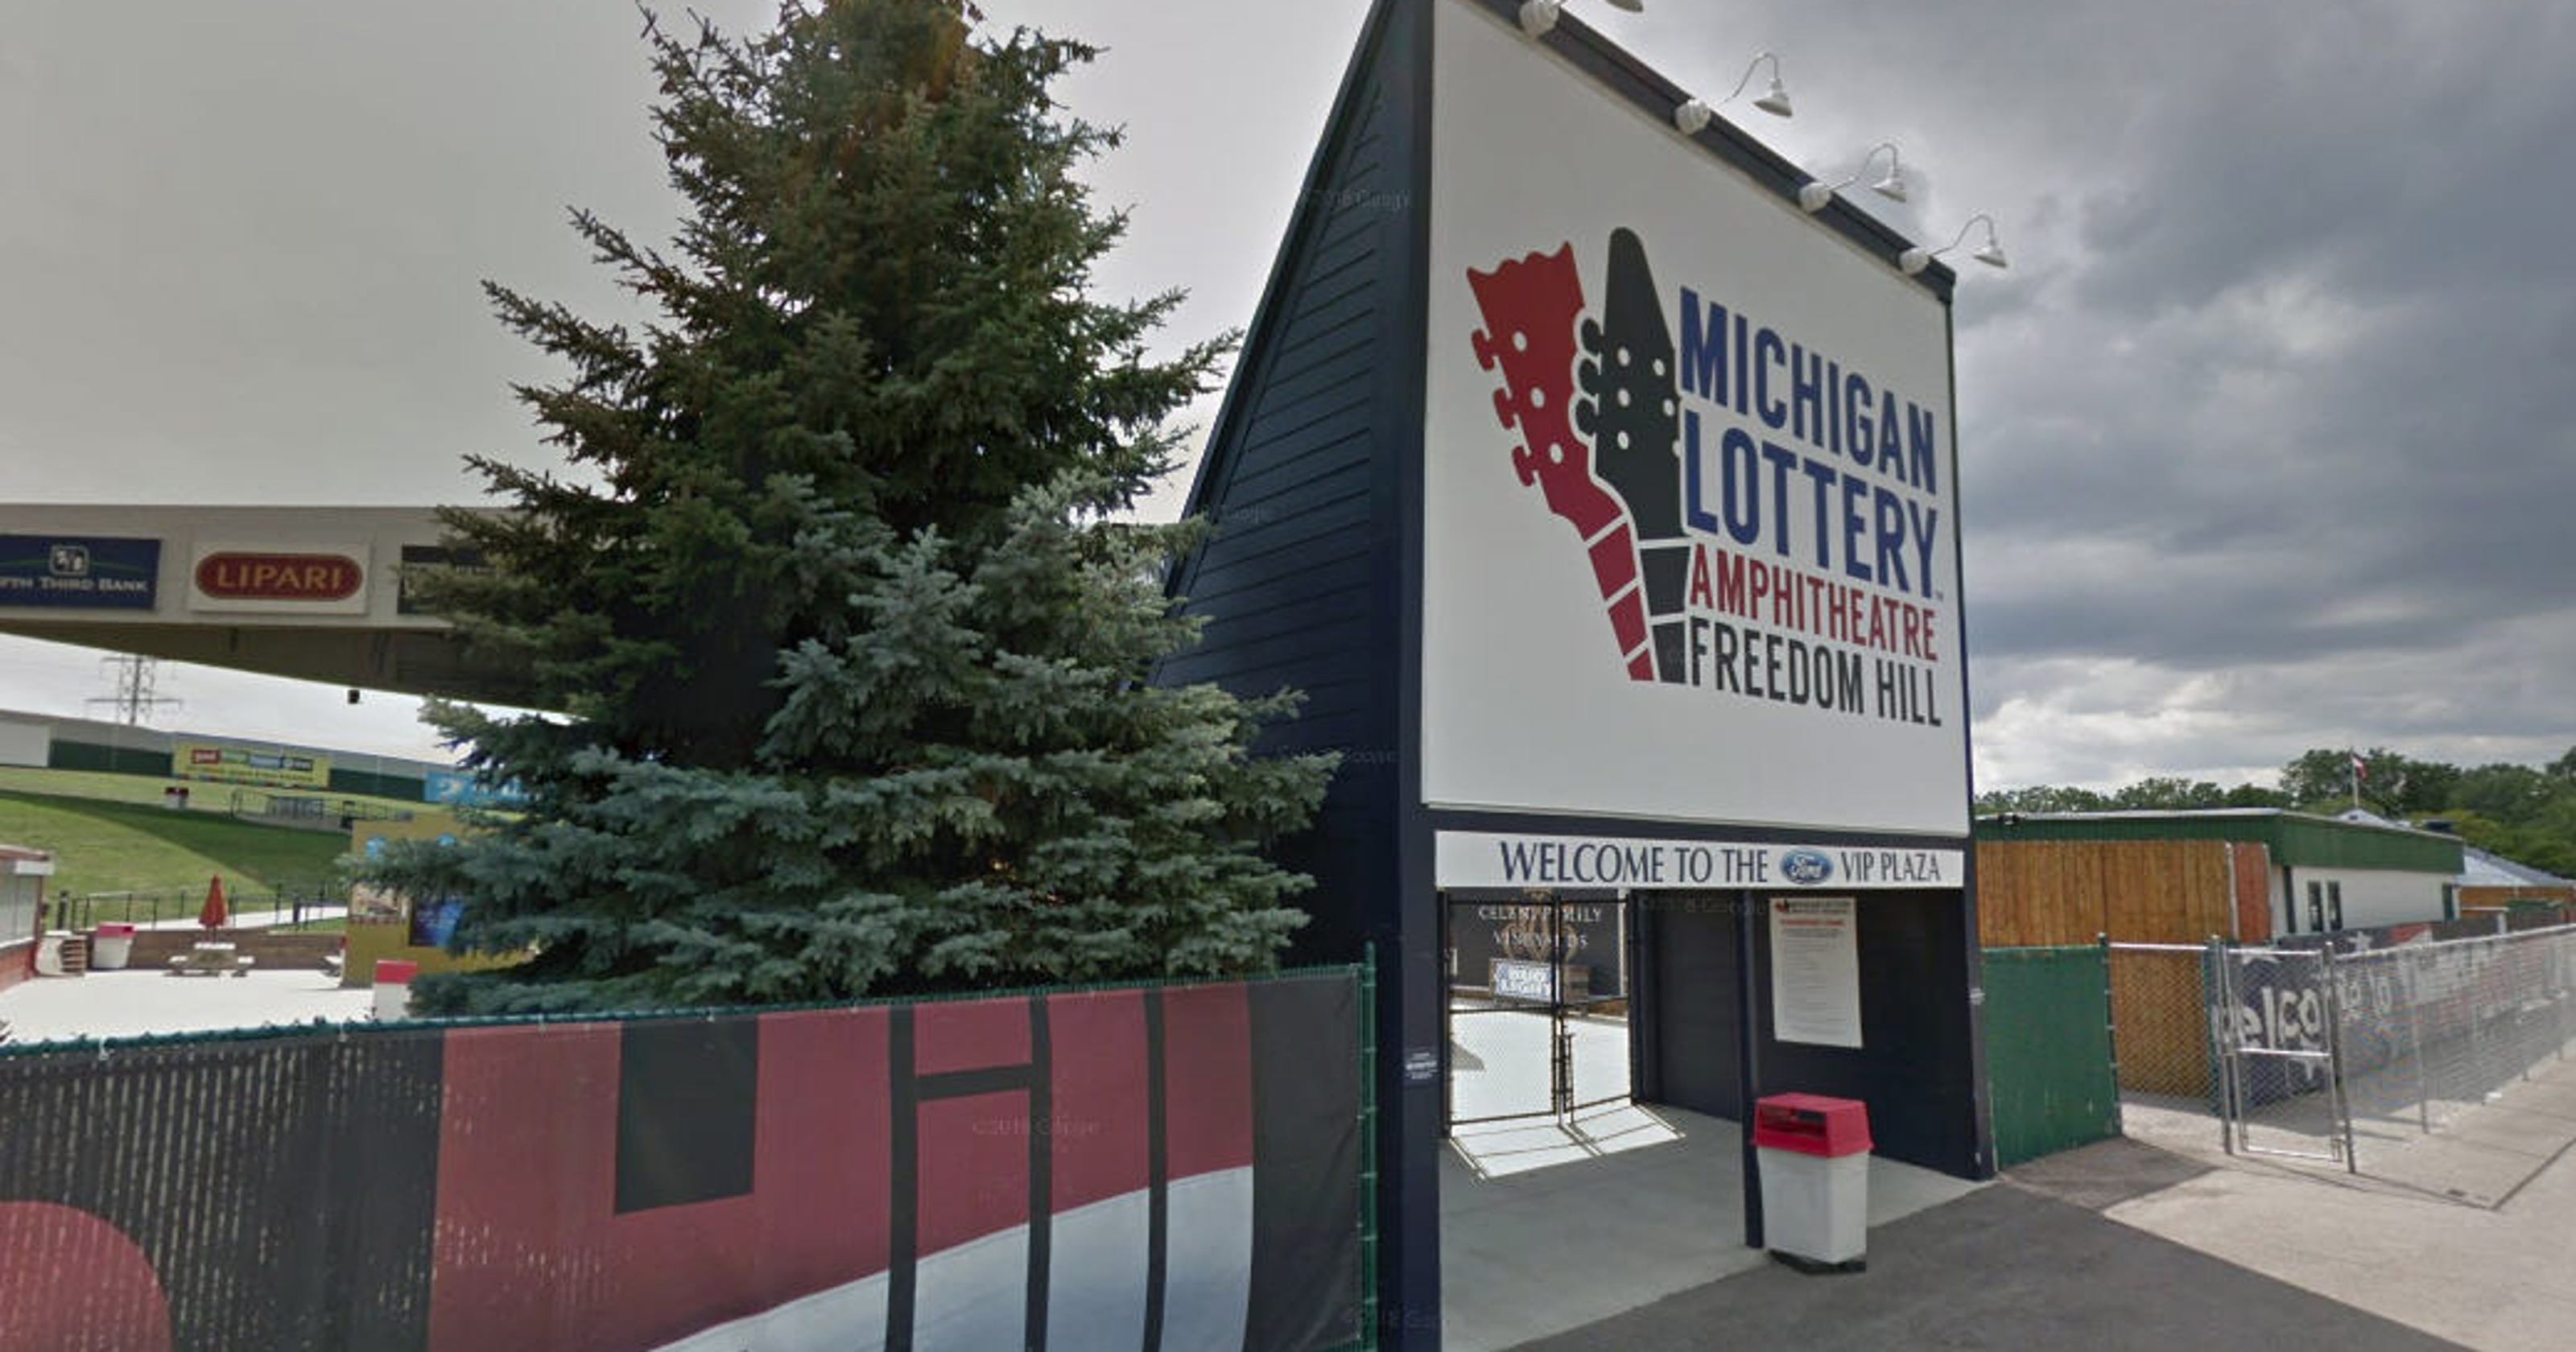 Threats prompt cancellation of concert at Michigan Lottery Amphitheatre